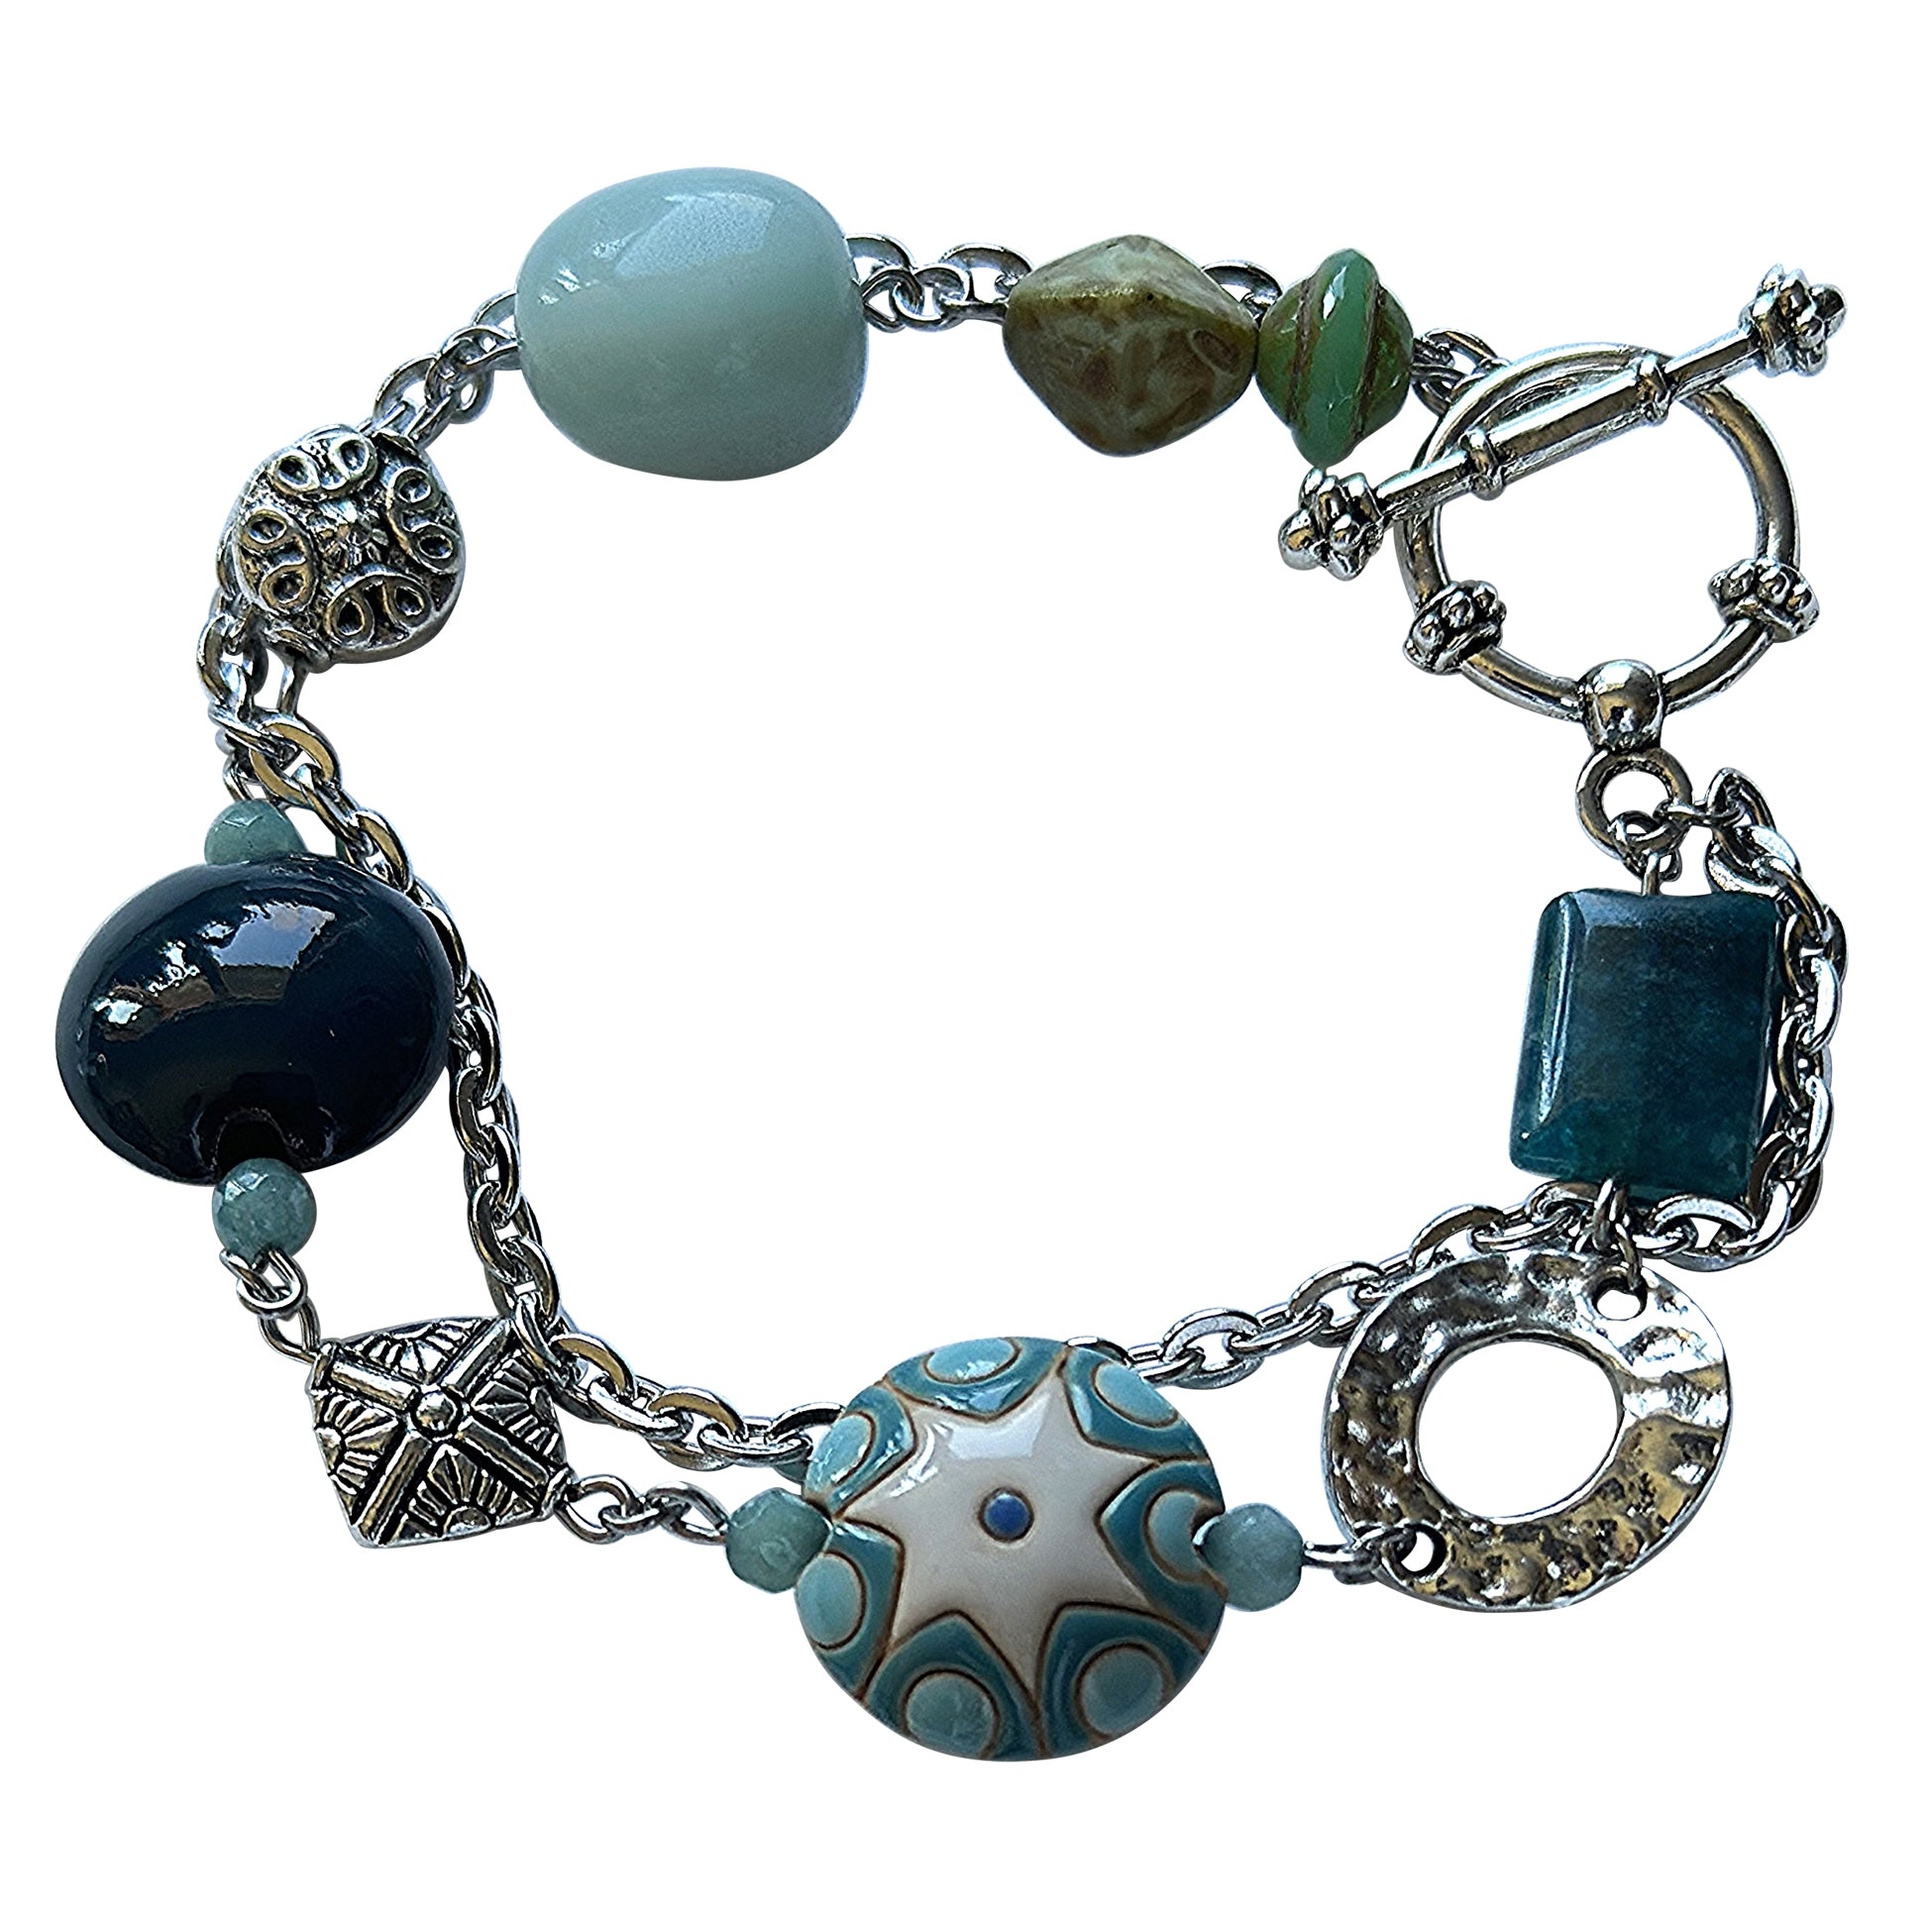 Silver Chain, Gemstone Bracelet with Teal Amazonite and Apatite Stones